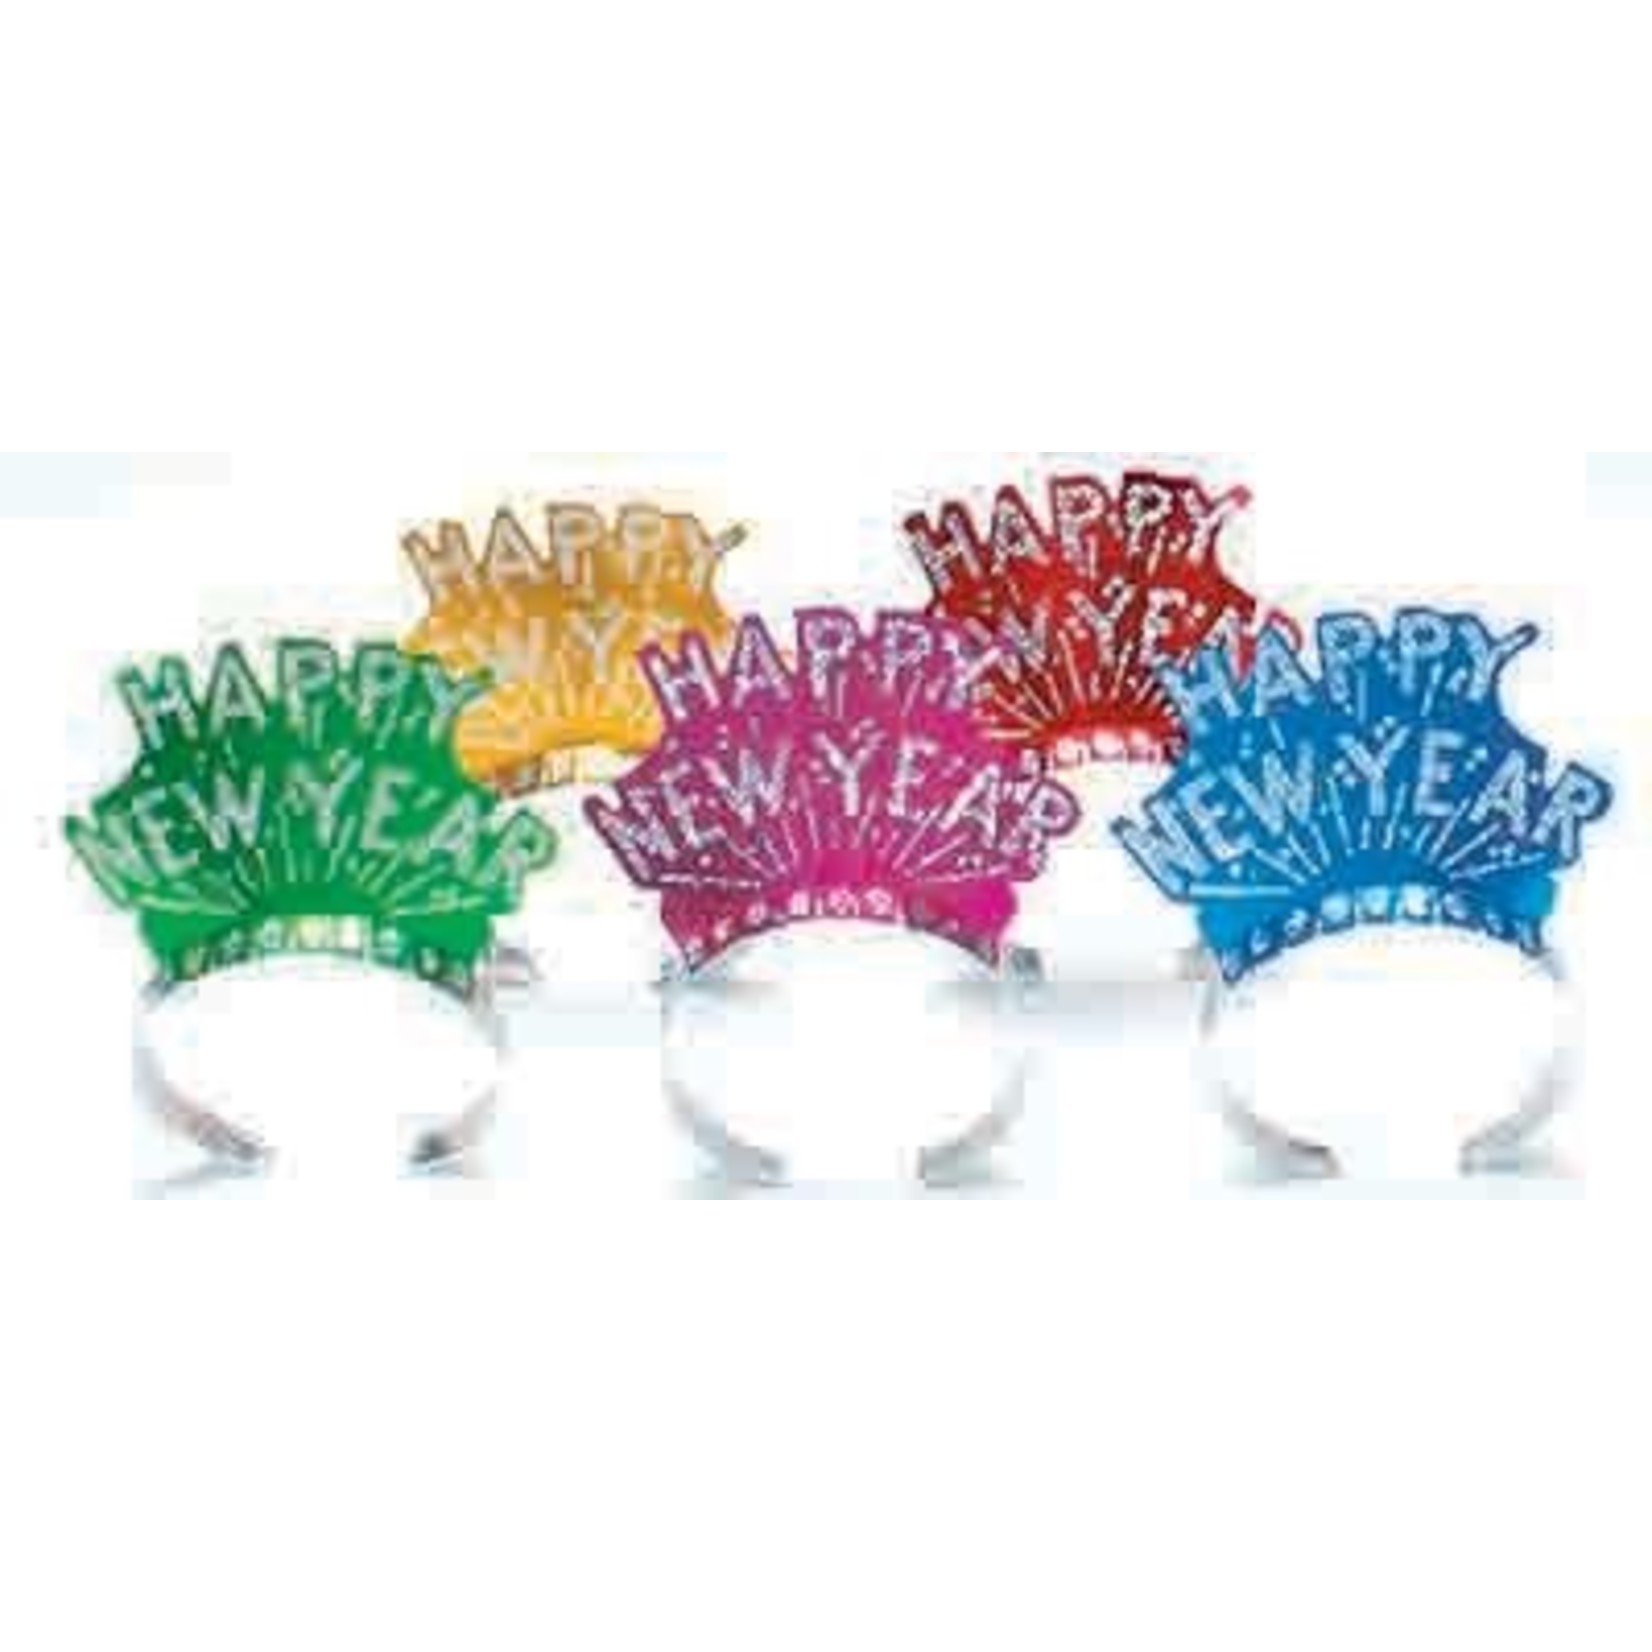 party time Happy New Year's Tiara w/ Tinsel - 1ct. (Asst. Colors)